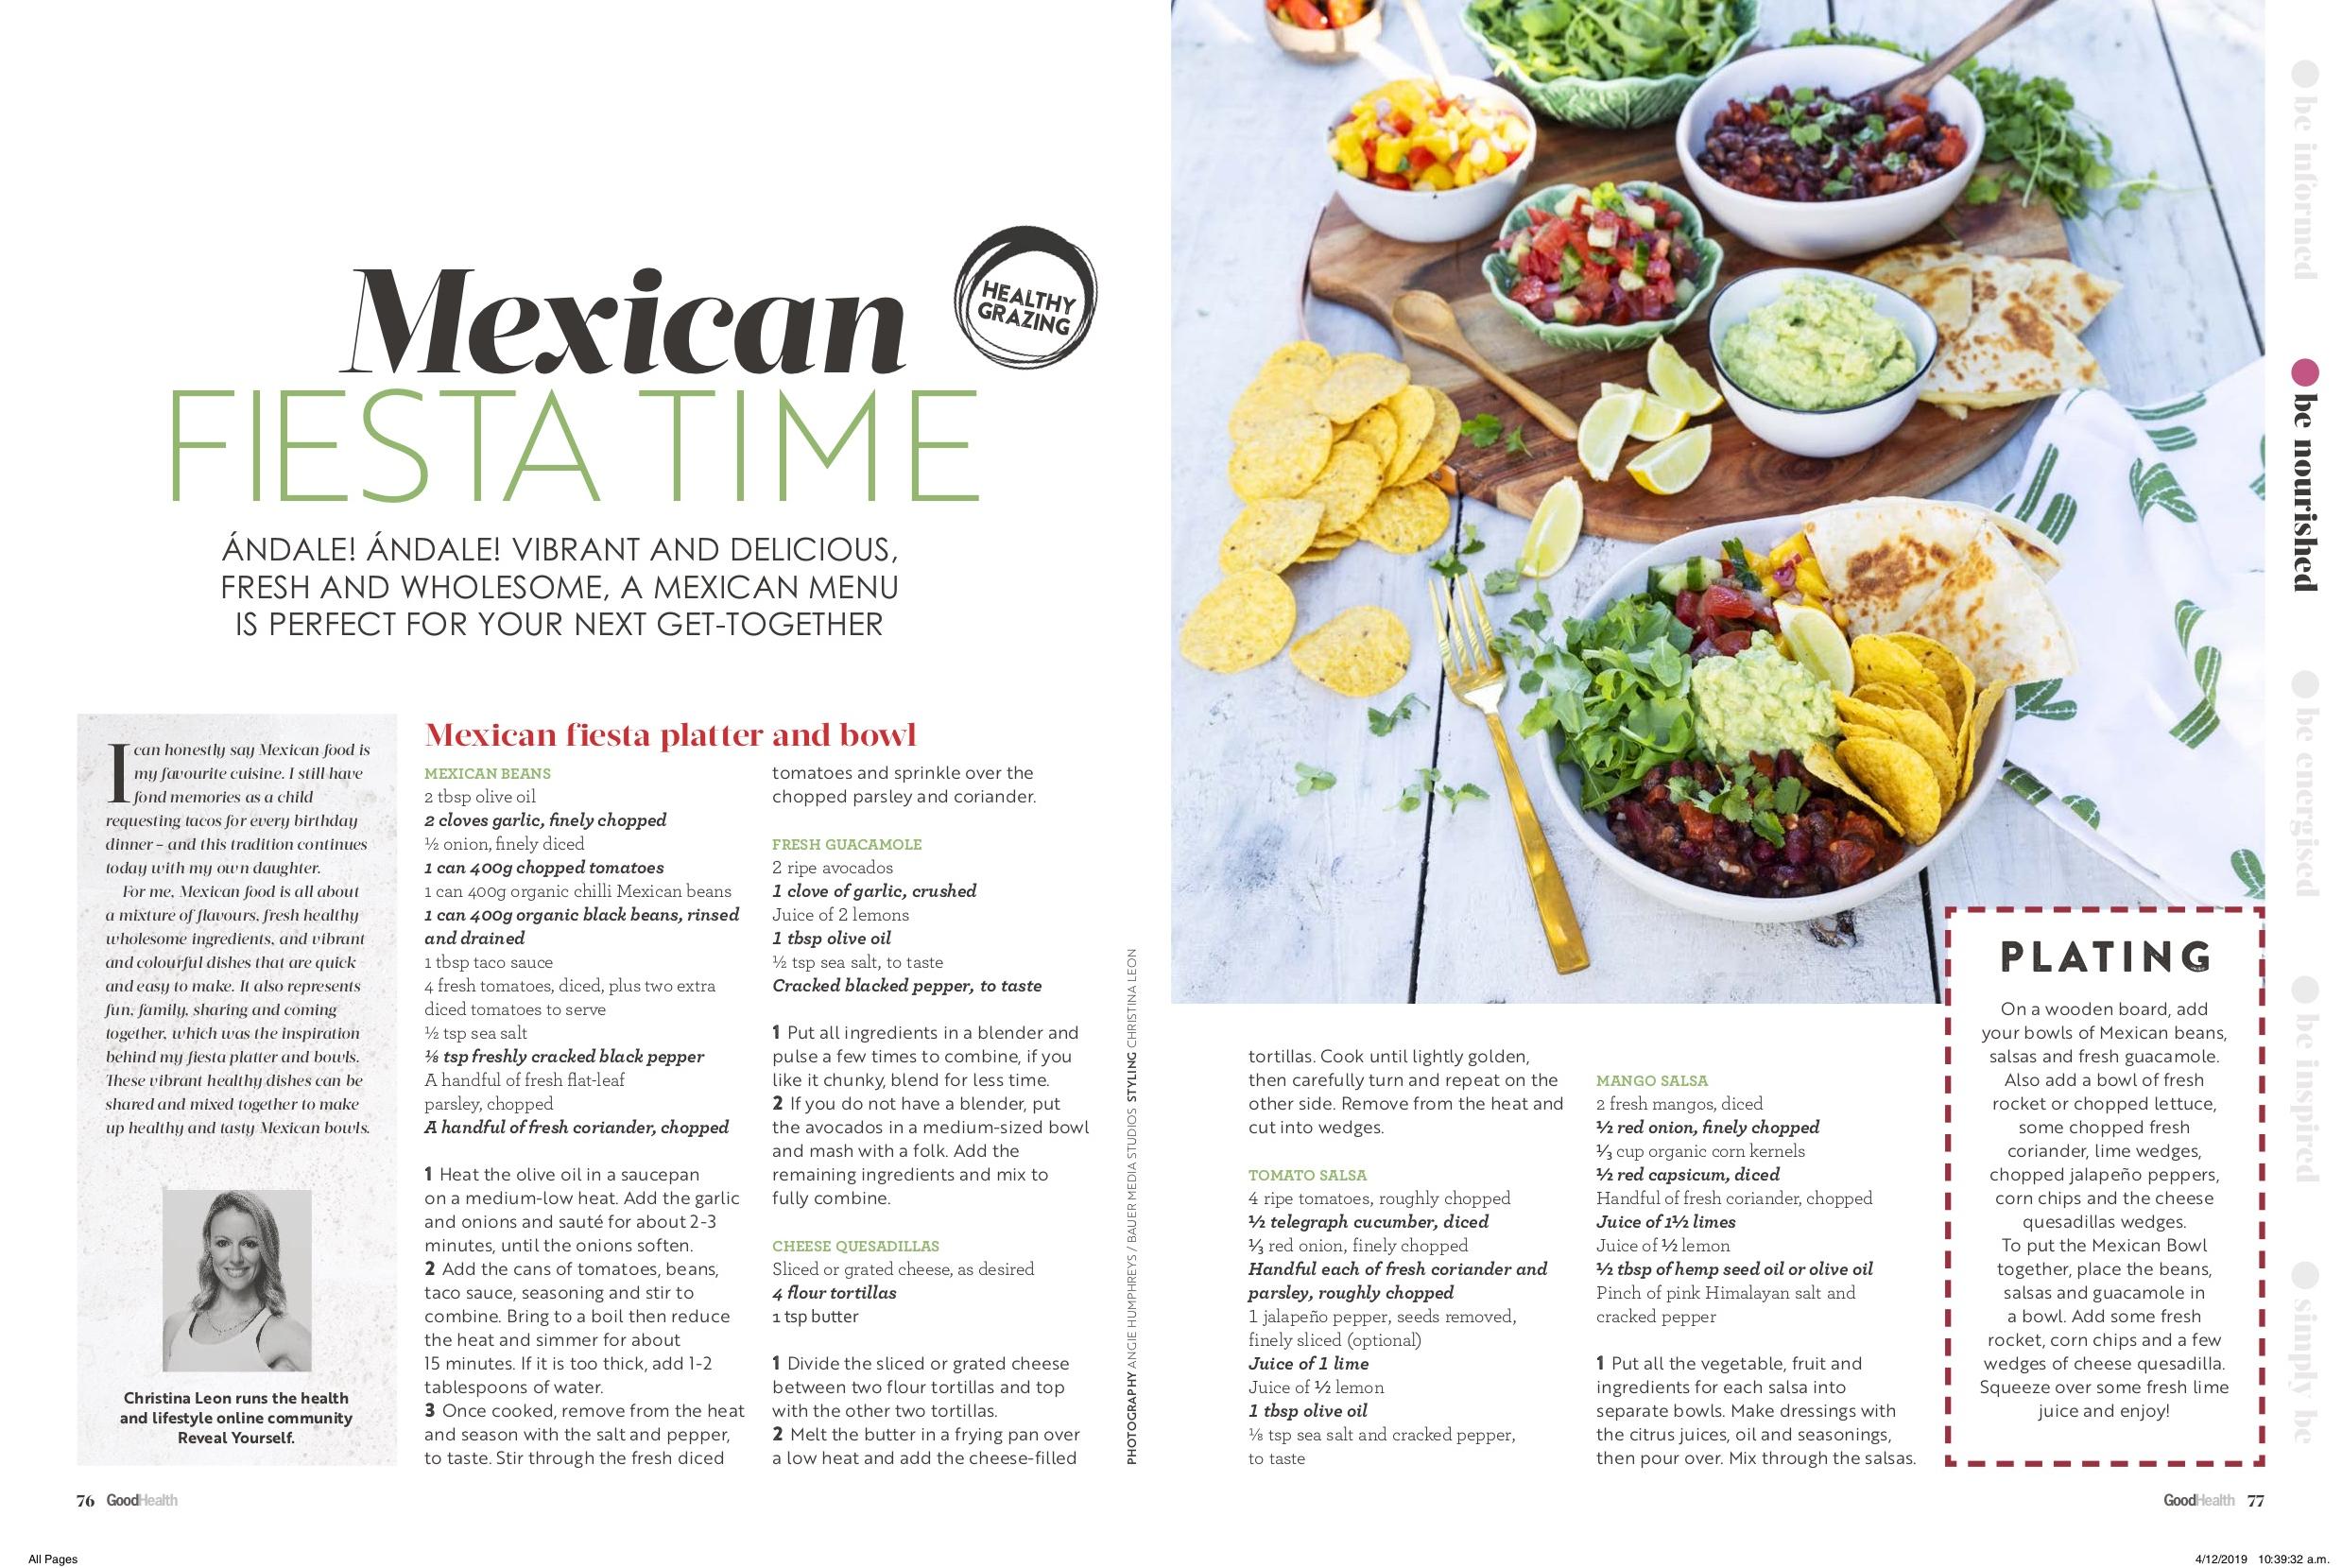  Bring the flavors of Mexico to your plate with this delicious platter.